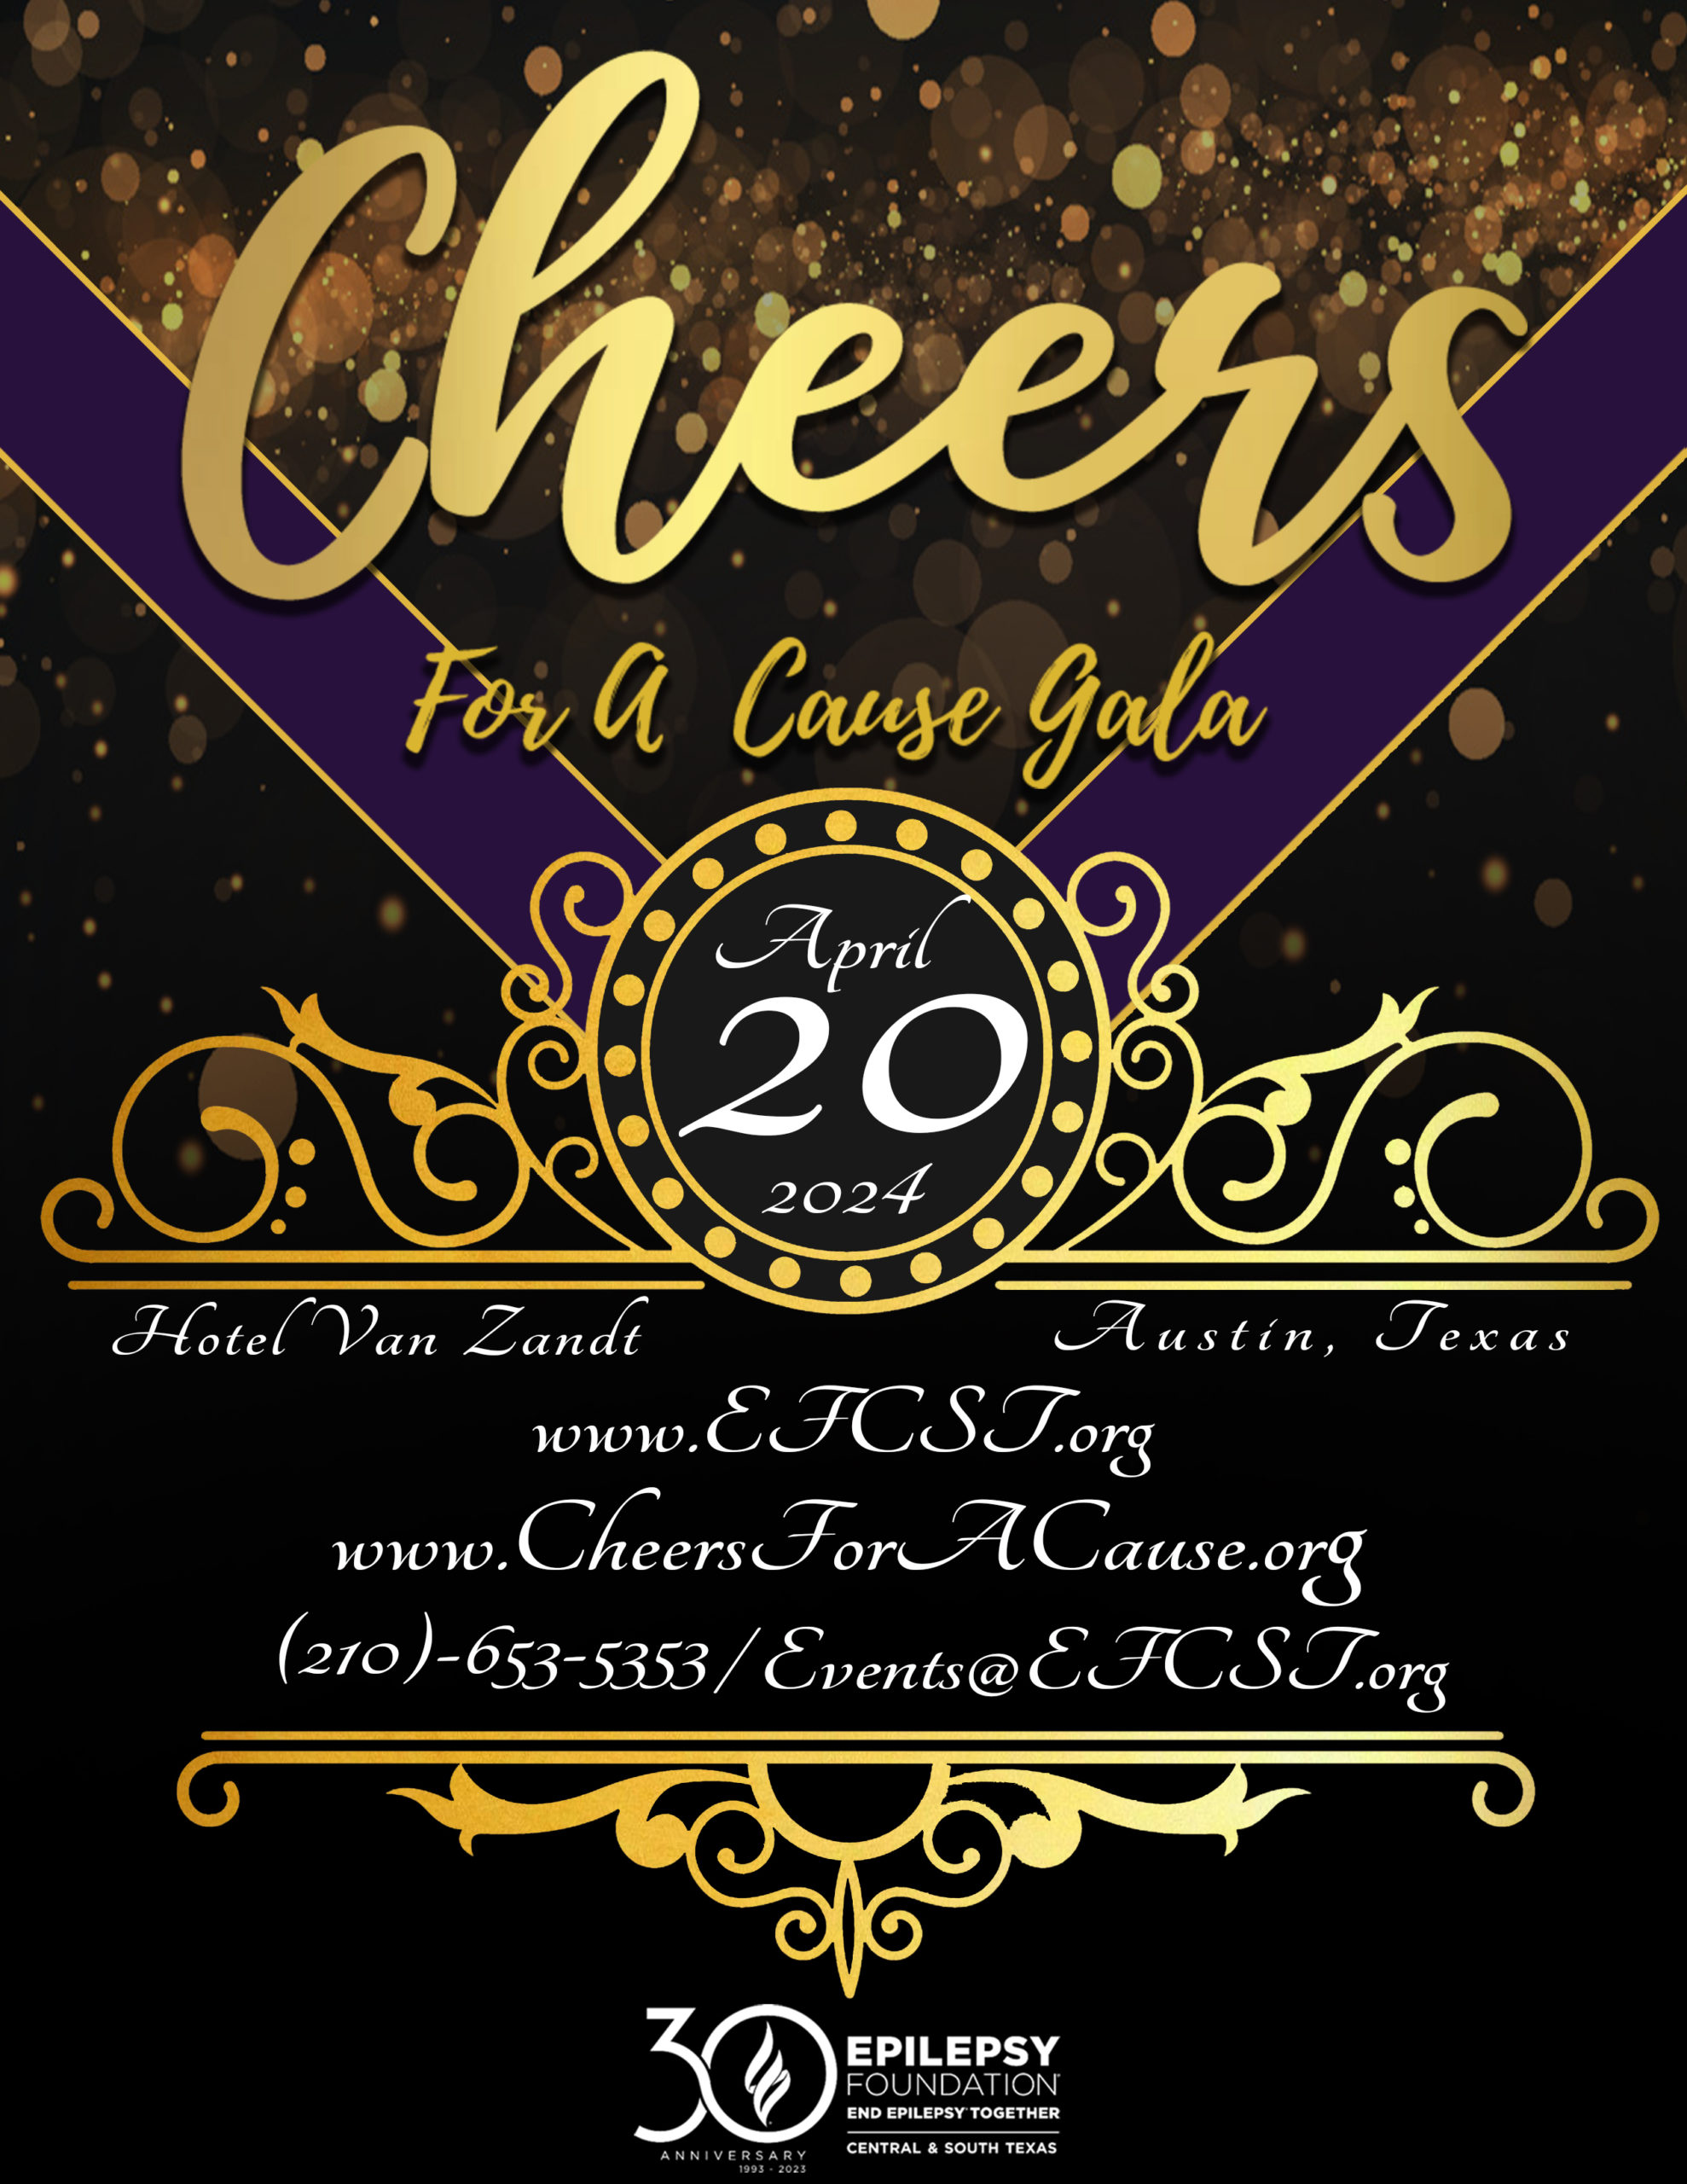 Cheers for a Cause Gala Epilepsy Foundation Central & South Texas